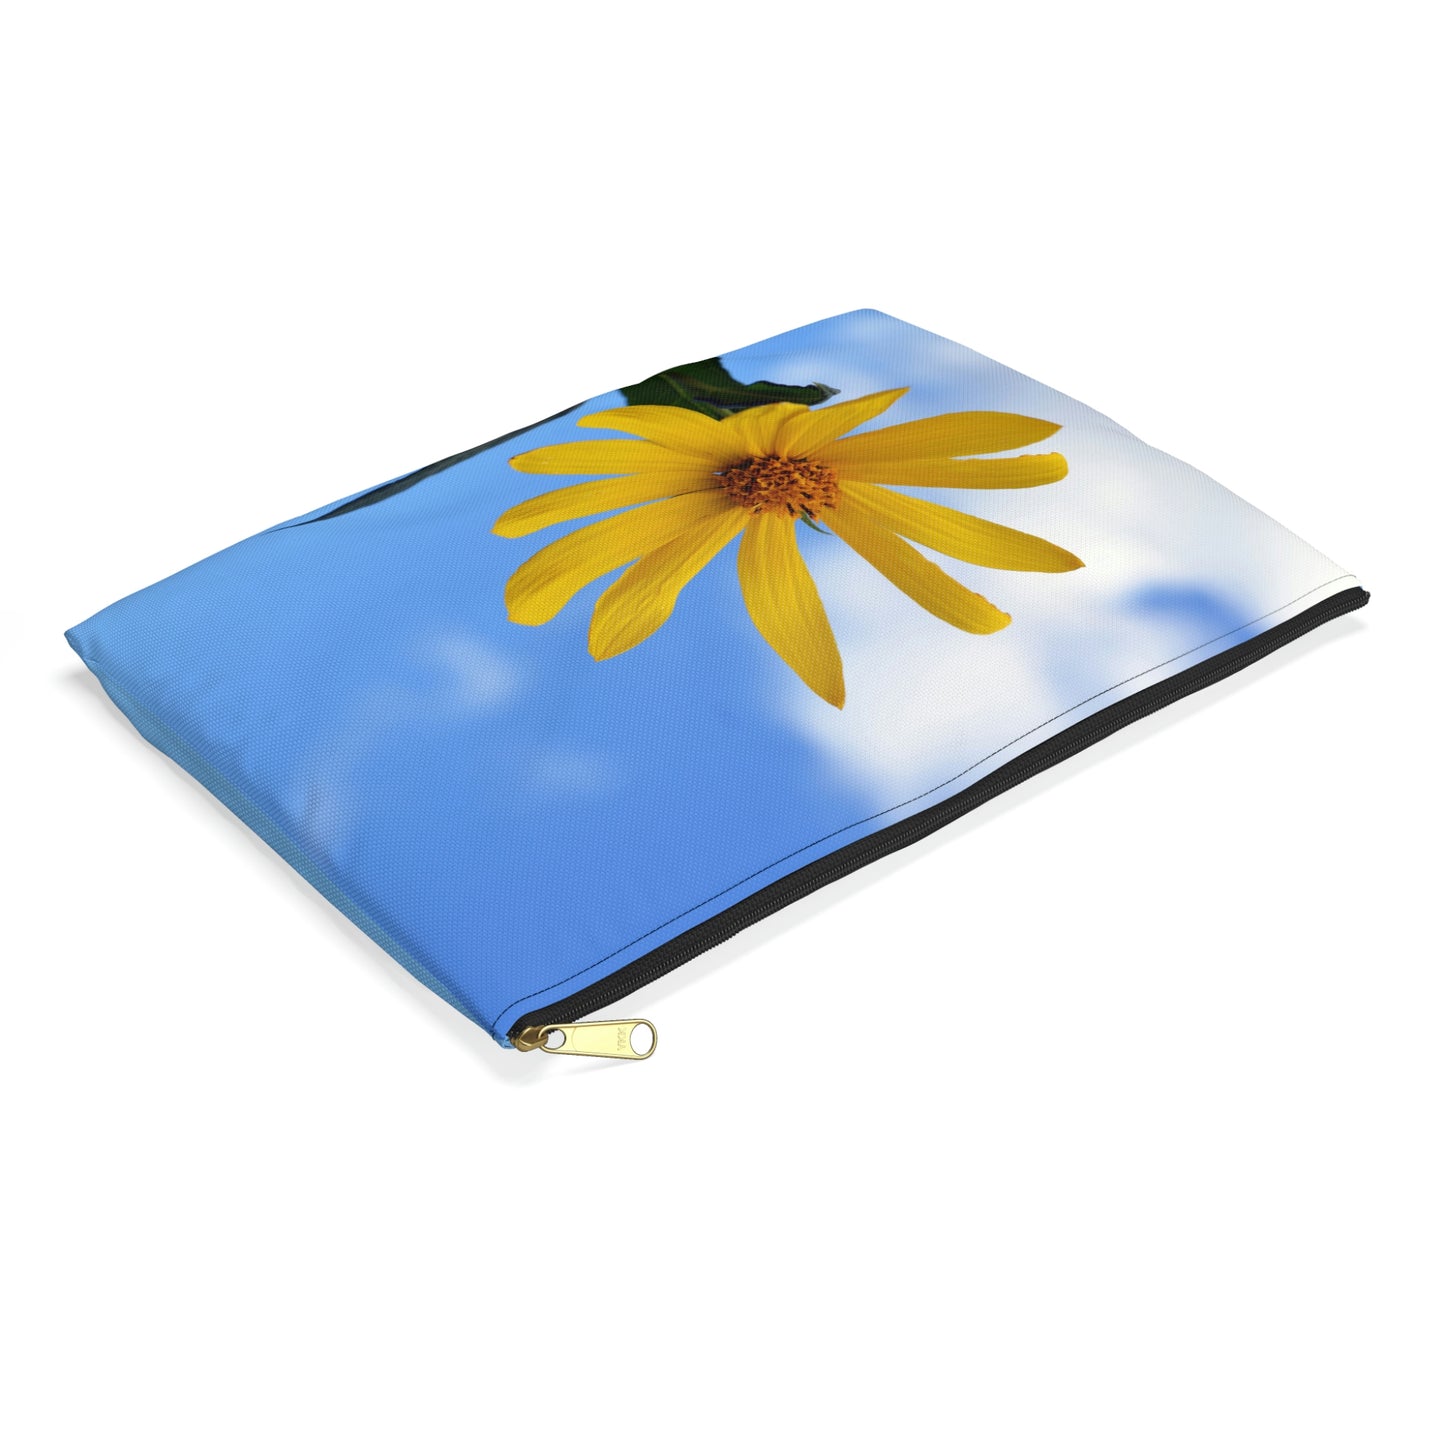 Flowers 31 Accessory Pouch